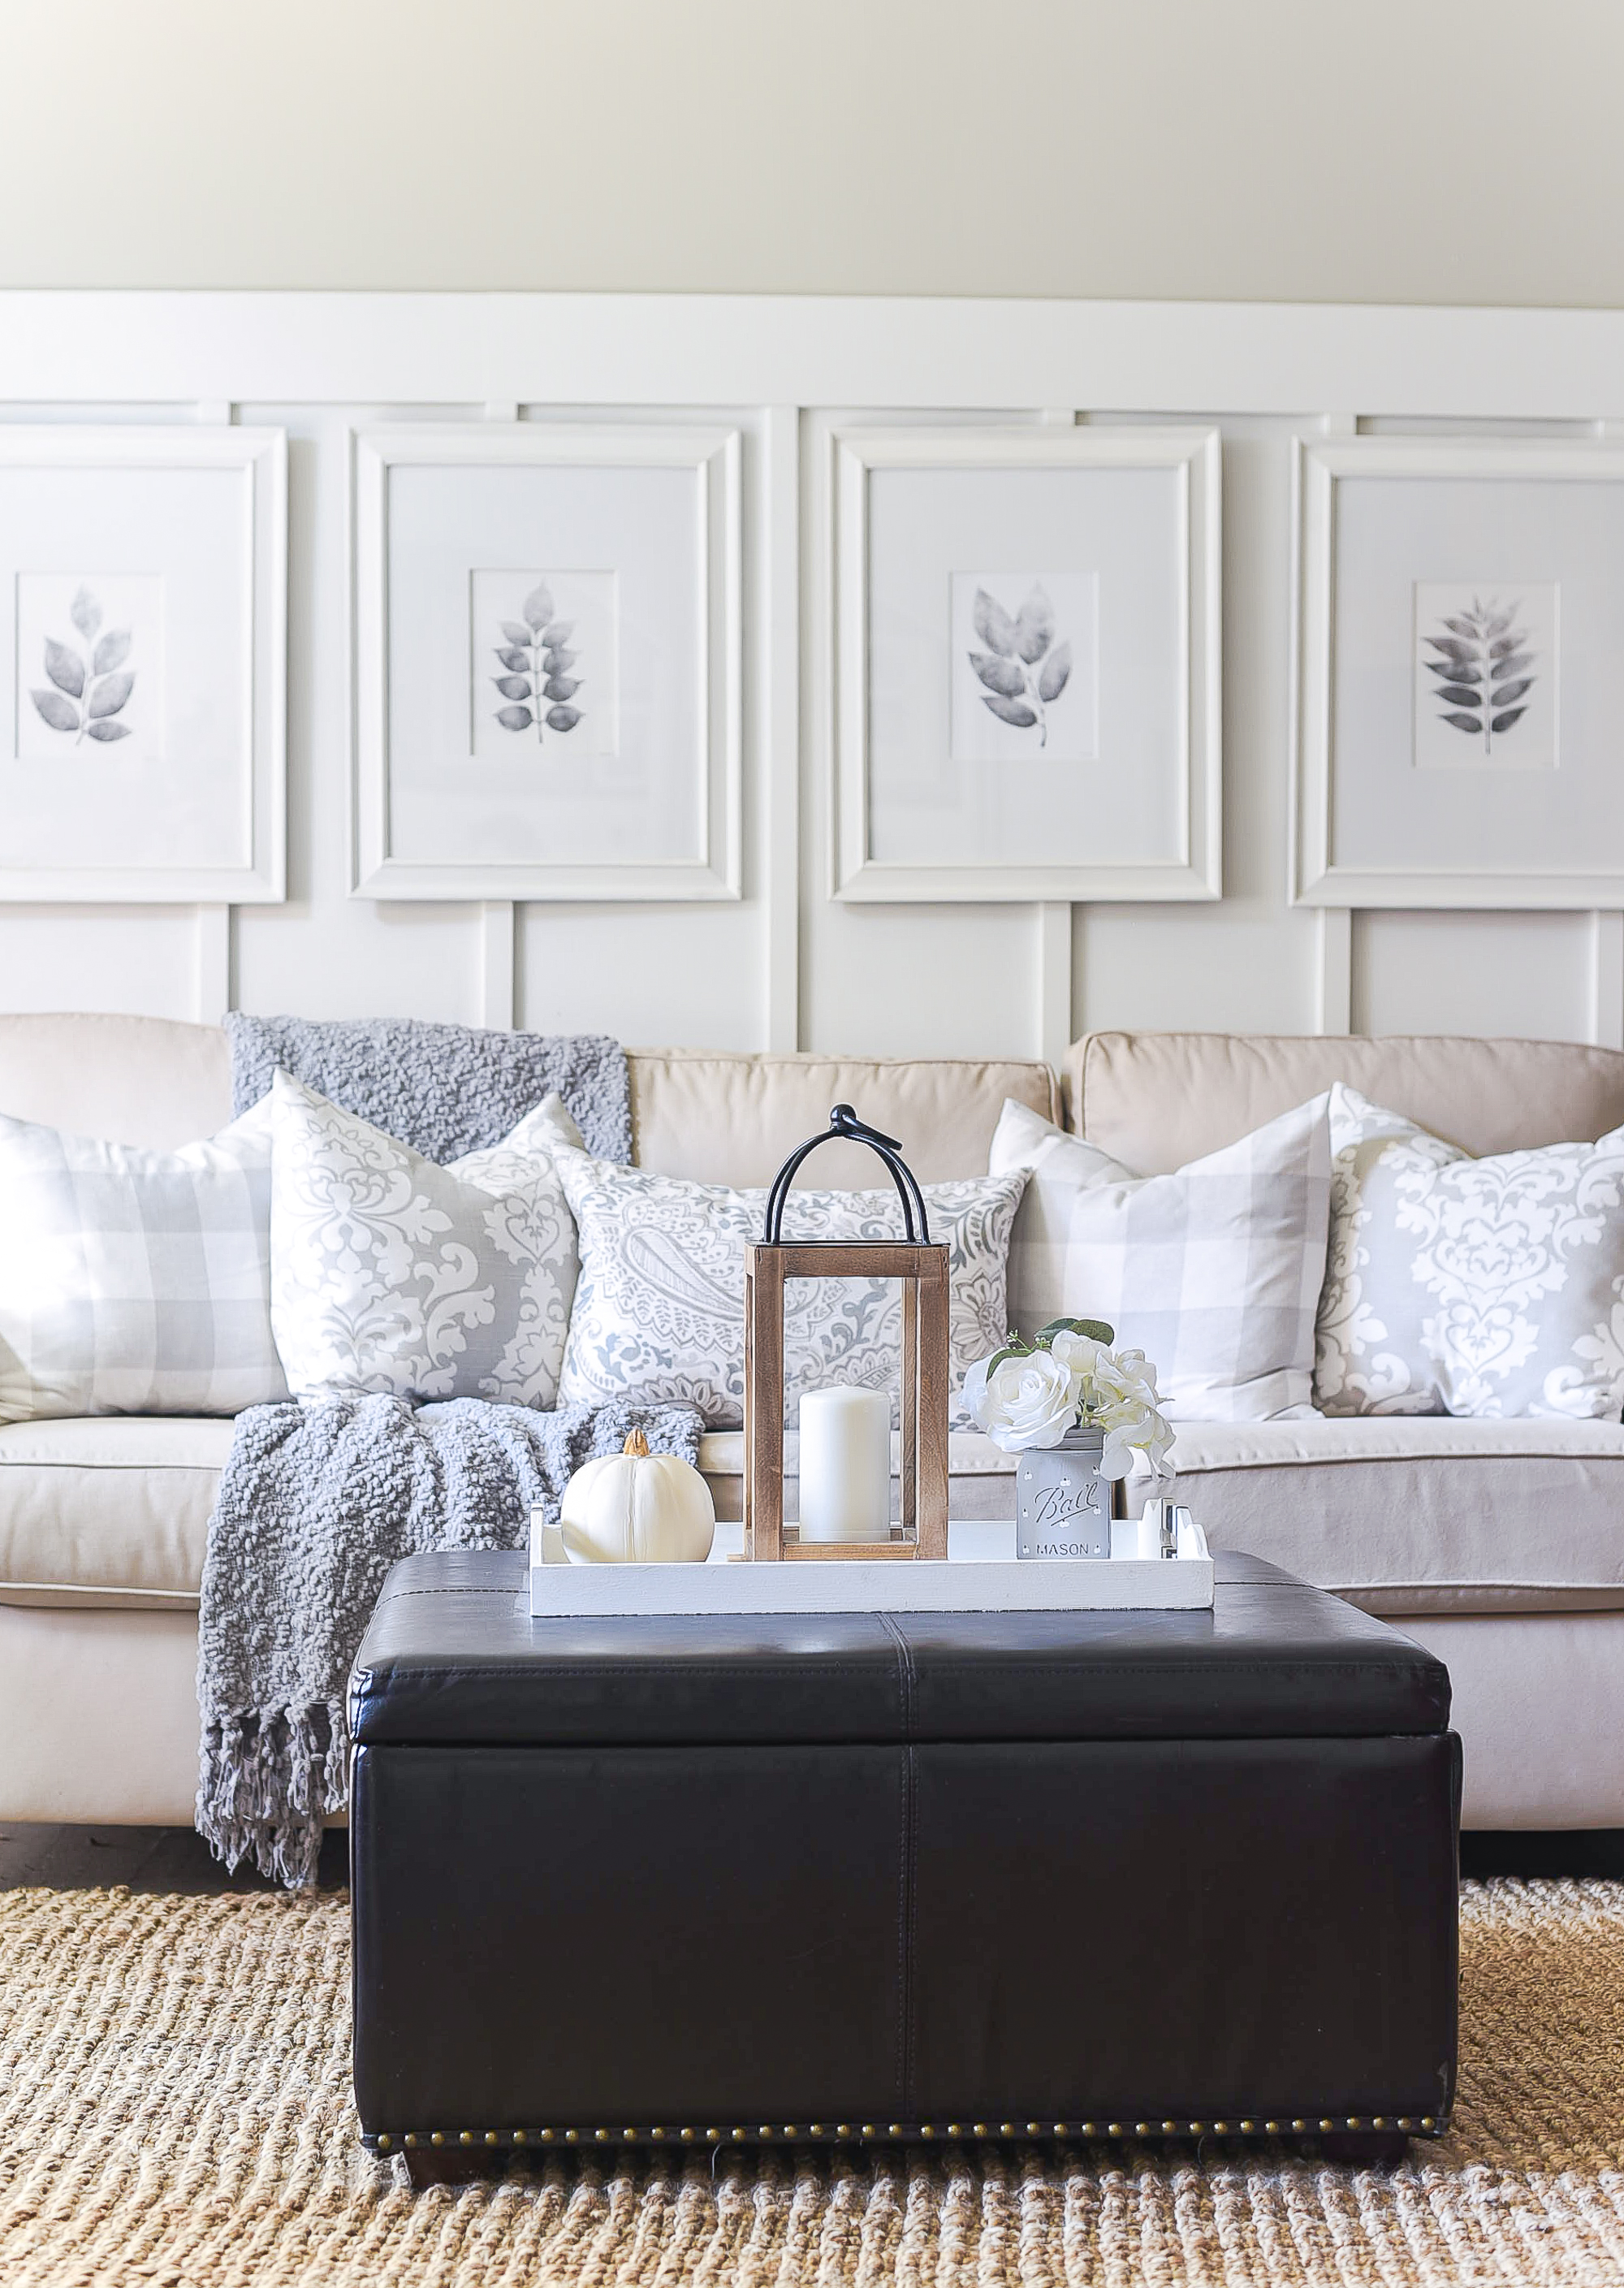 Fall in the Living Room - Neutral Fall Decor in White, Gray, Jute, Greige